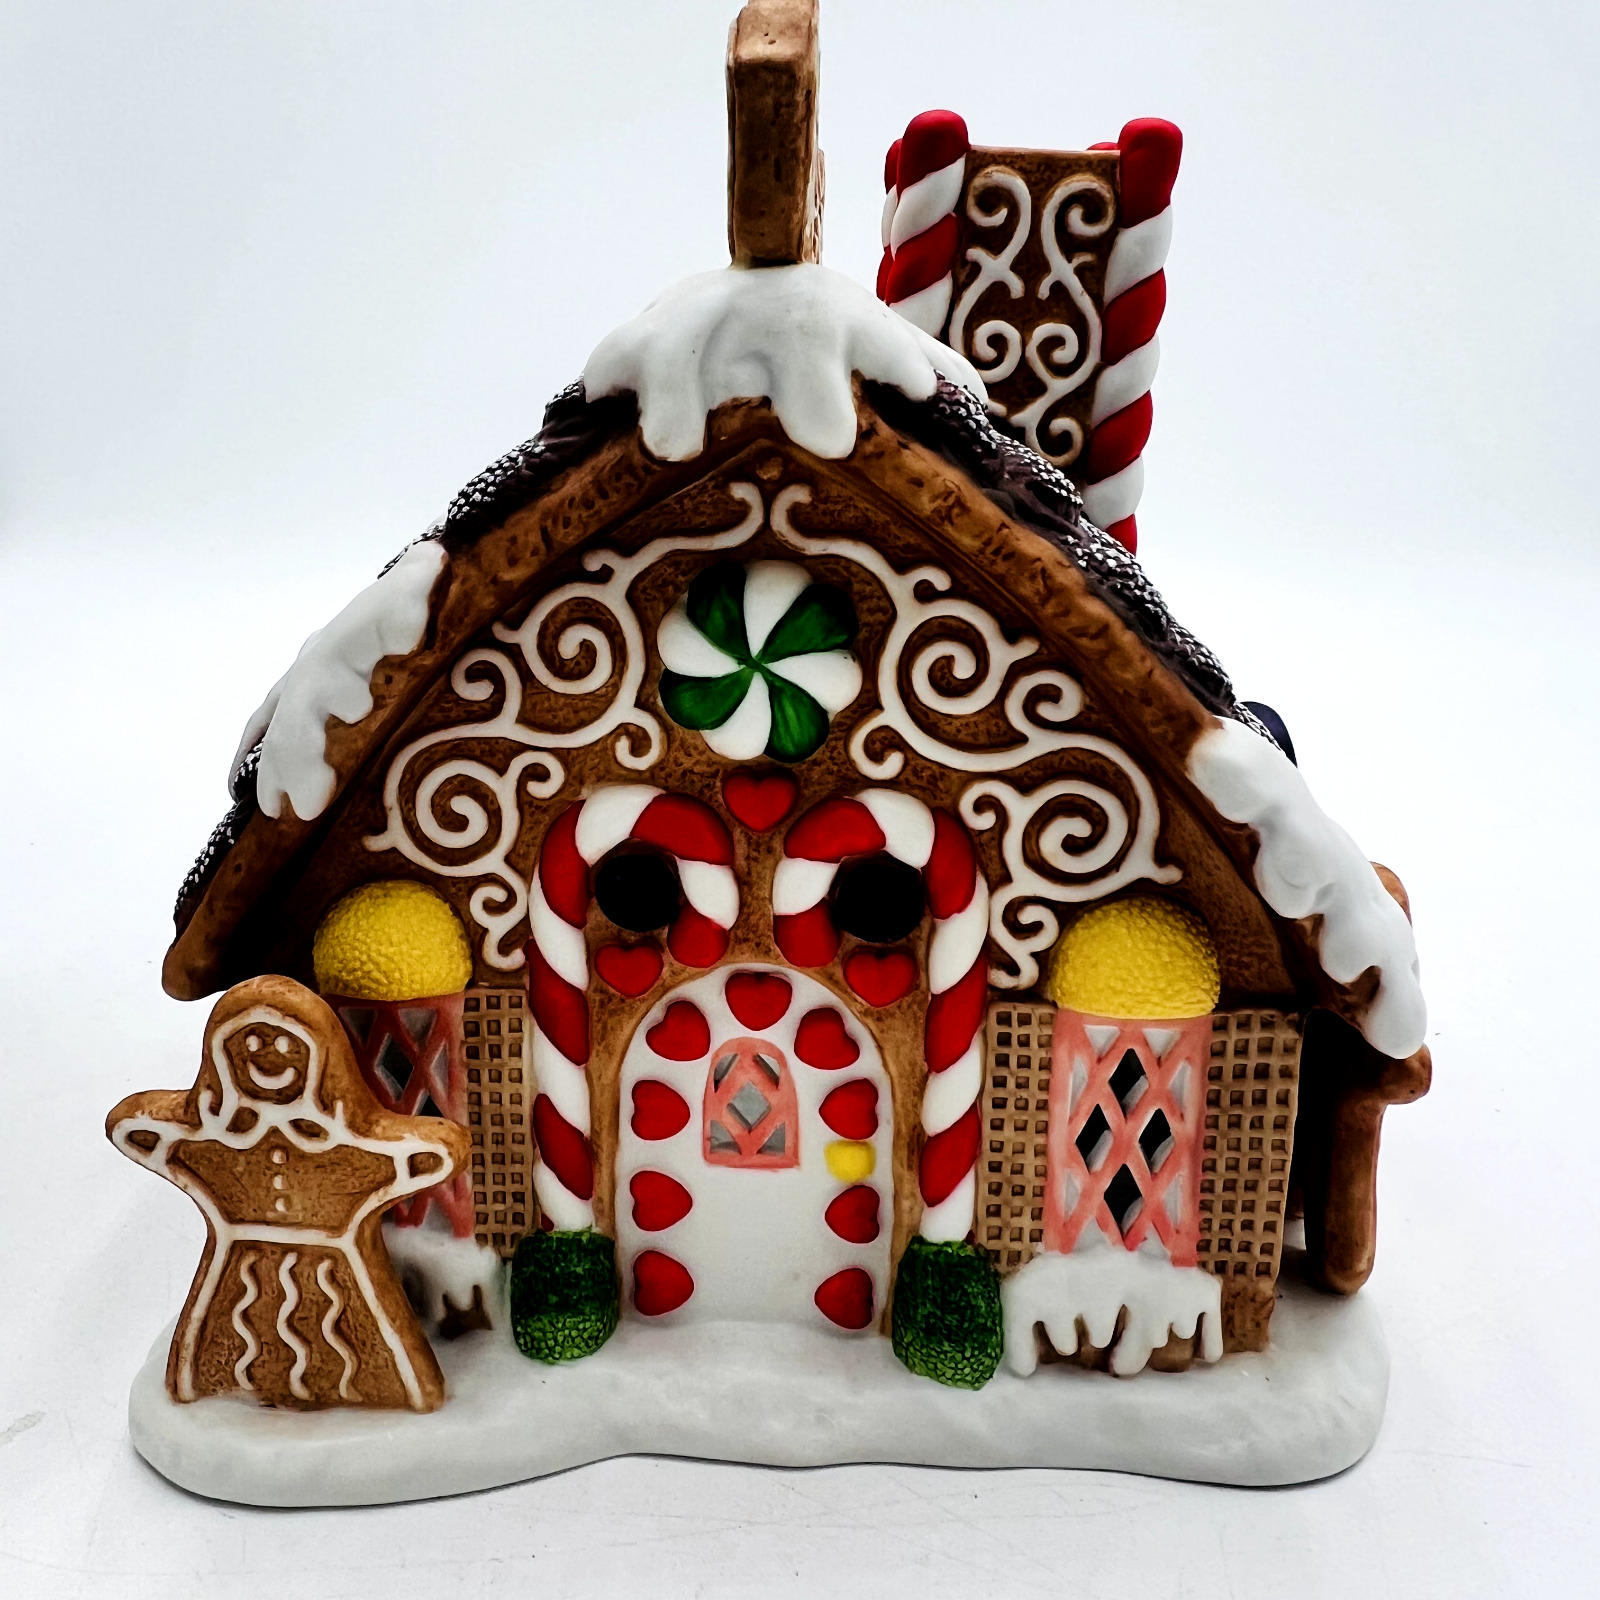 PartyLite Ceramic Holiday Gingerbread Tealight House Retired Candle Holder